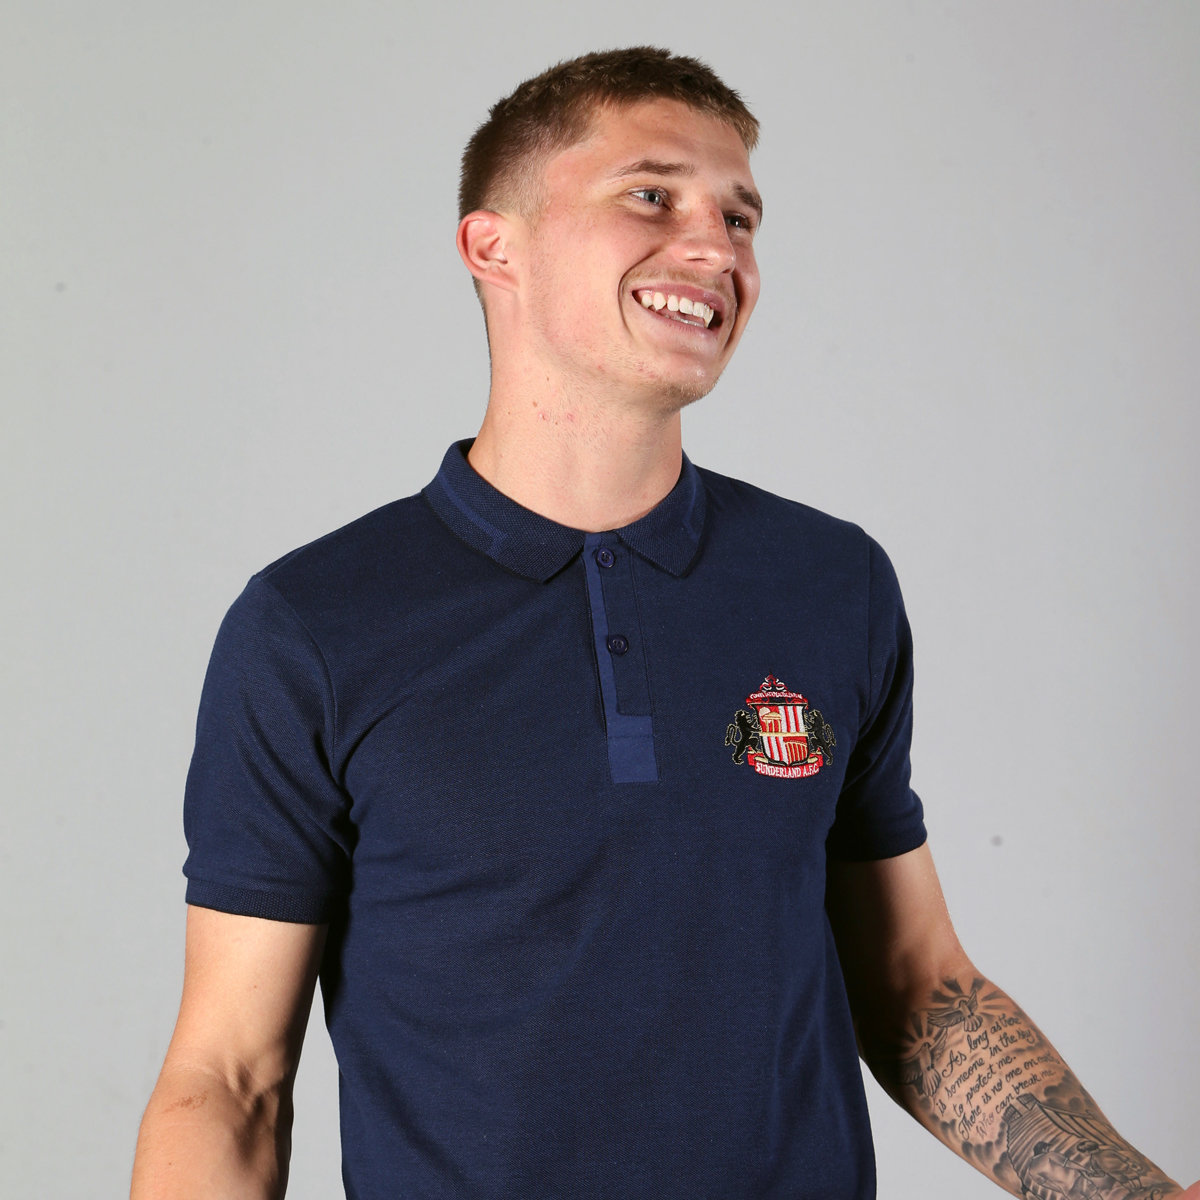 Buy the SAFC Plaquet Detail Polo online at Sunderland AFC Store